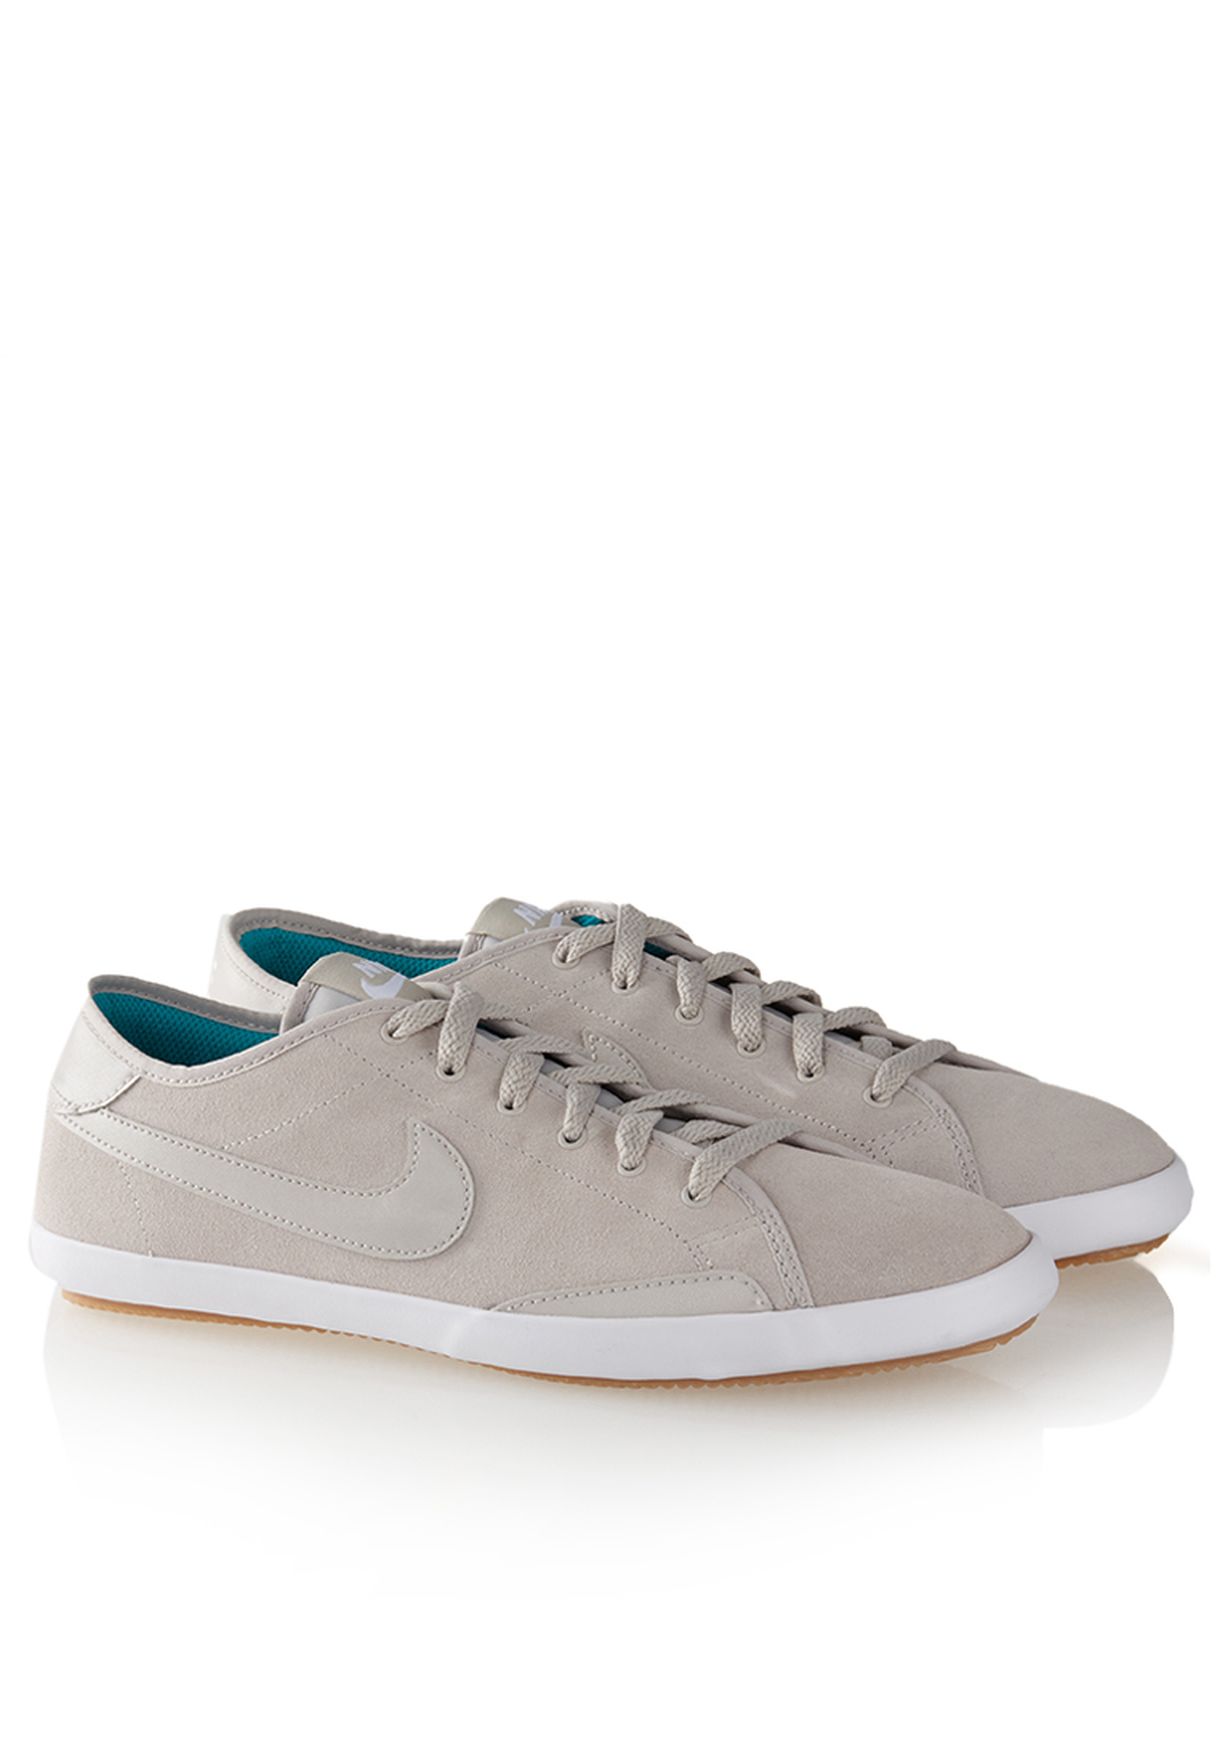 Buy Nike grey Nike Defendre Leather for 